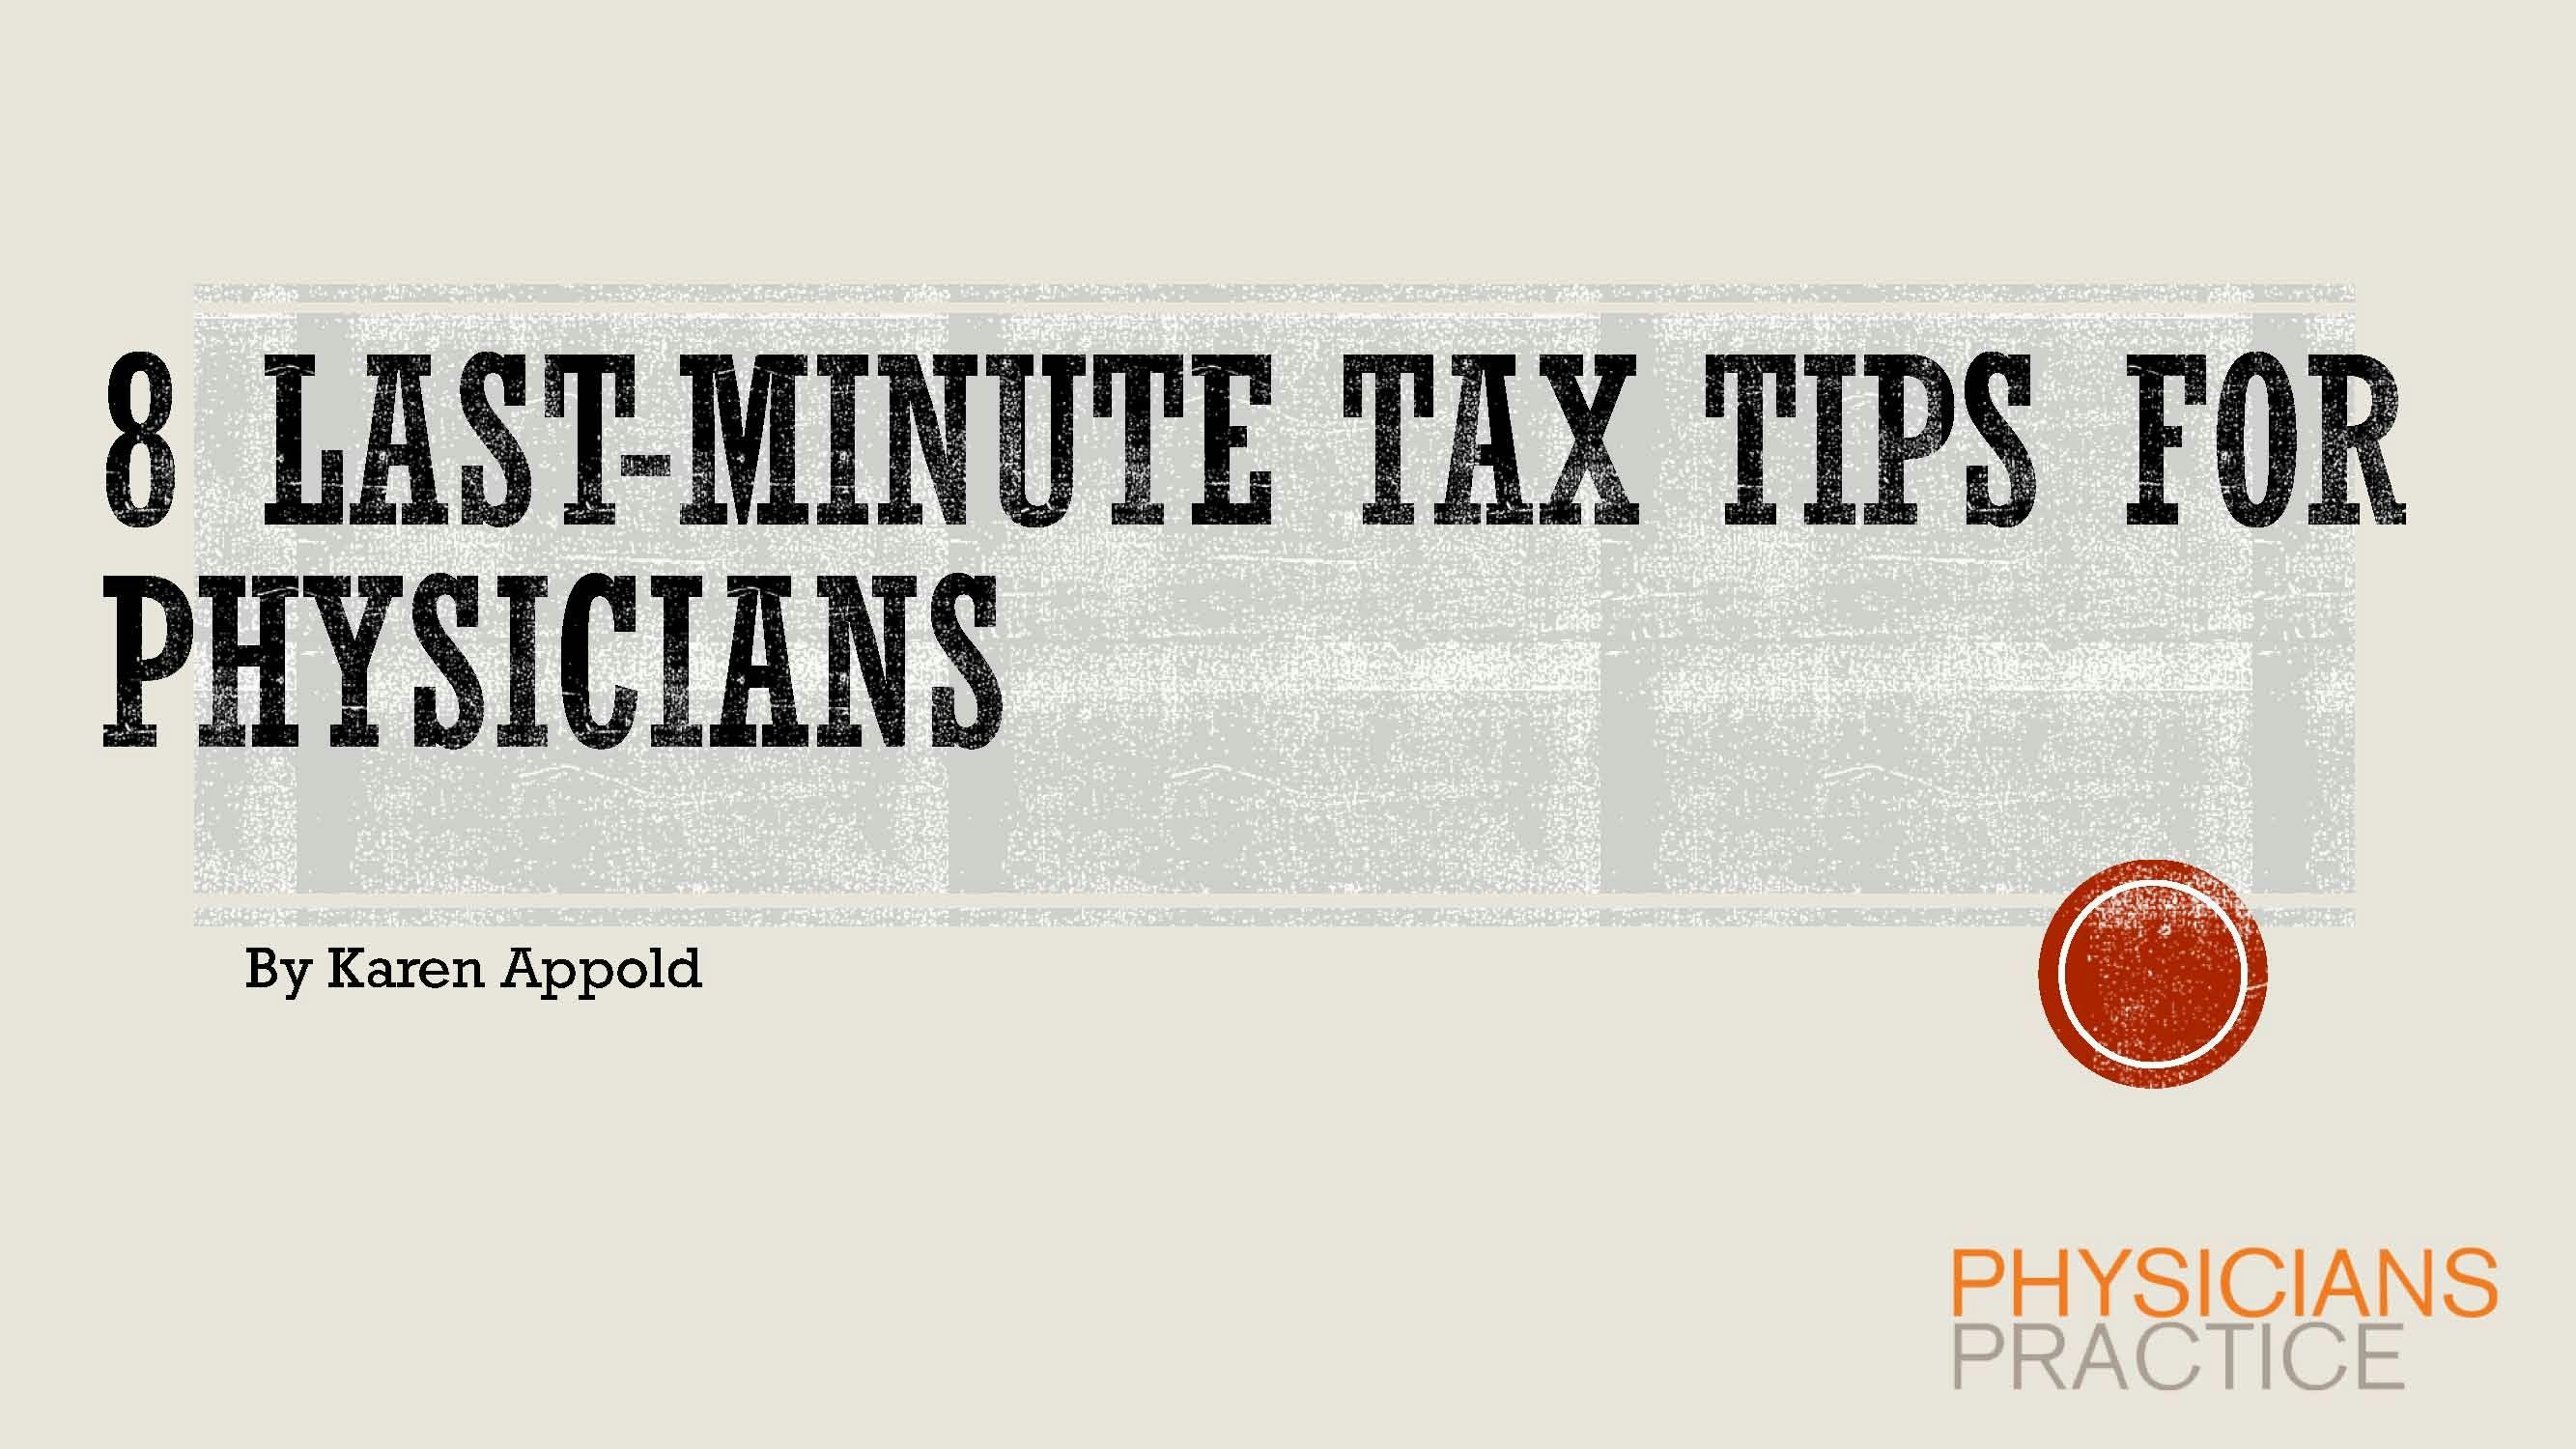 8 Last-Minute Tax Tips for Physicians